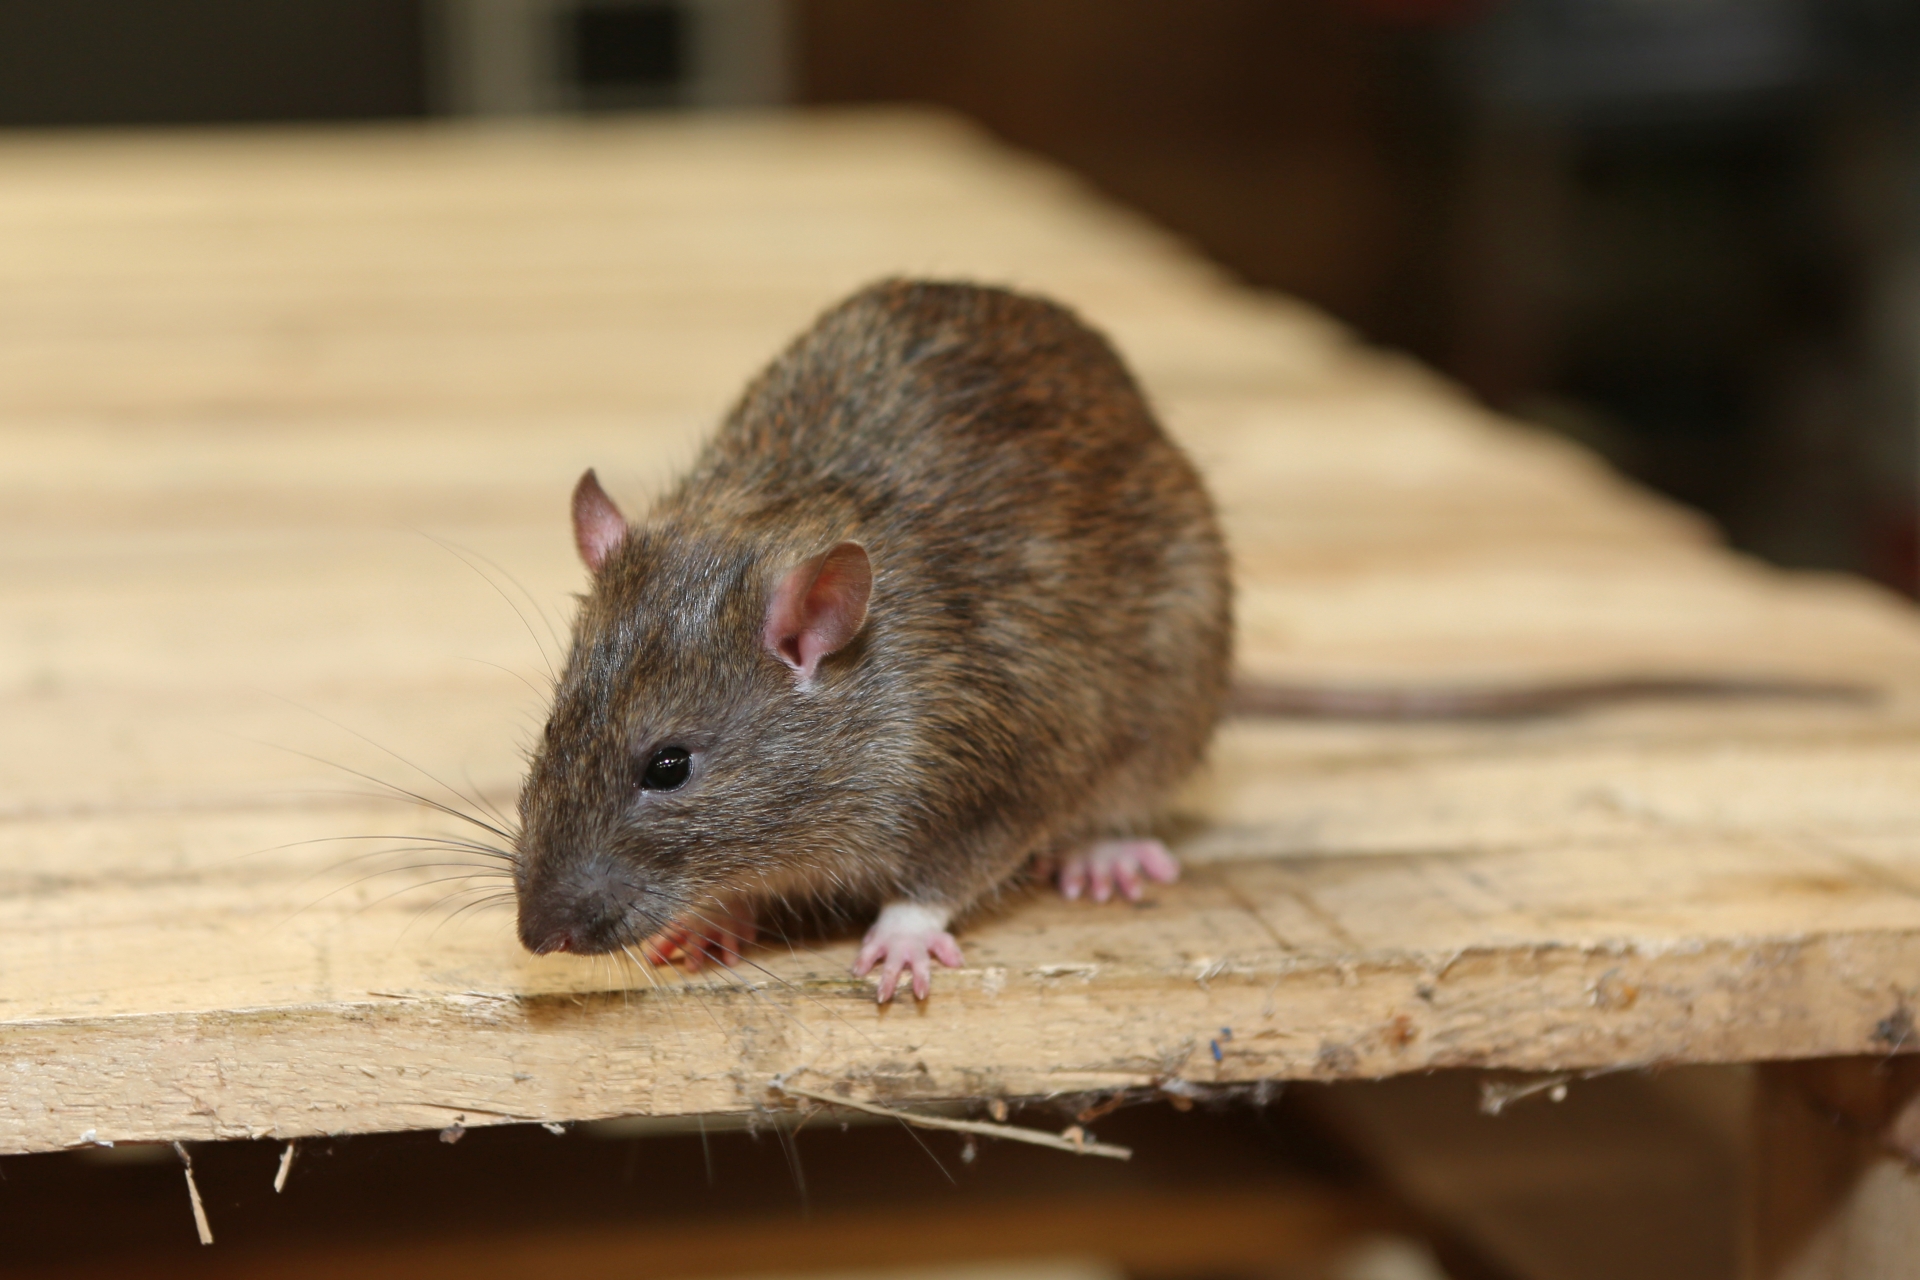 Rat extermination, Pest Control in West Horsley, East Horsley, Effingham, KT24. Call Now 020 8166 9746